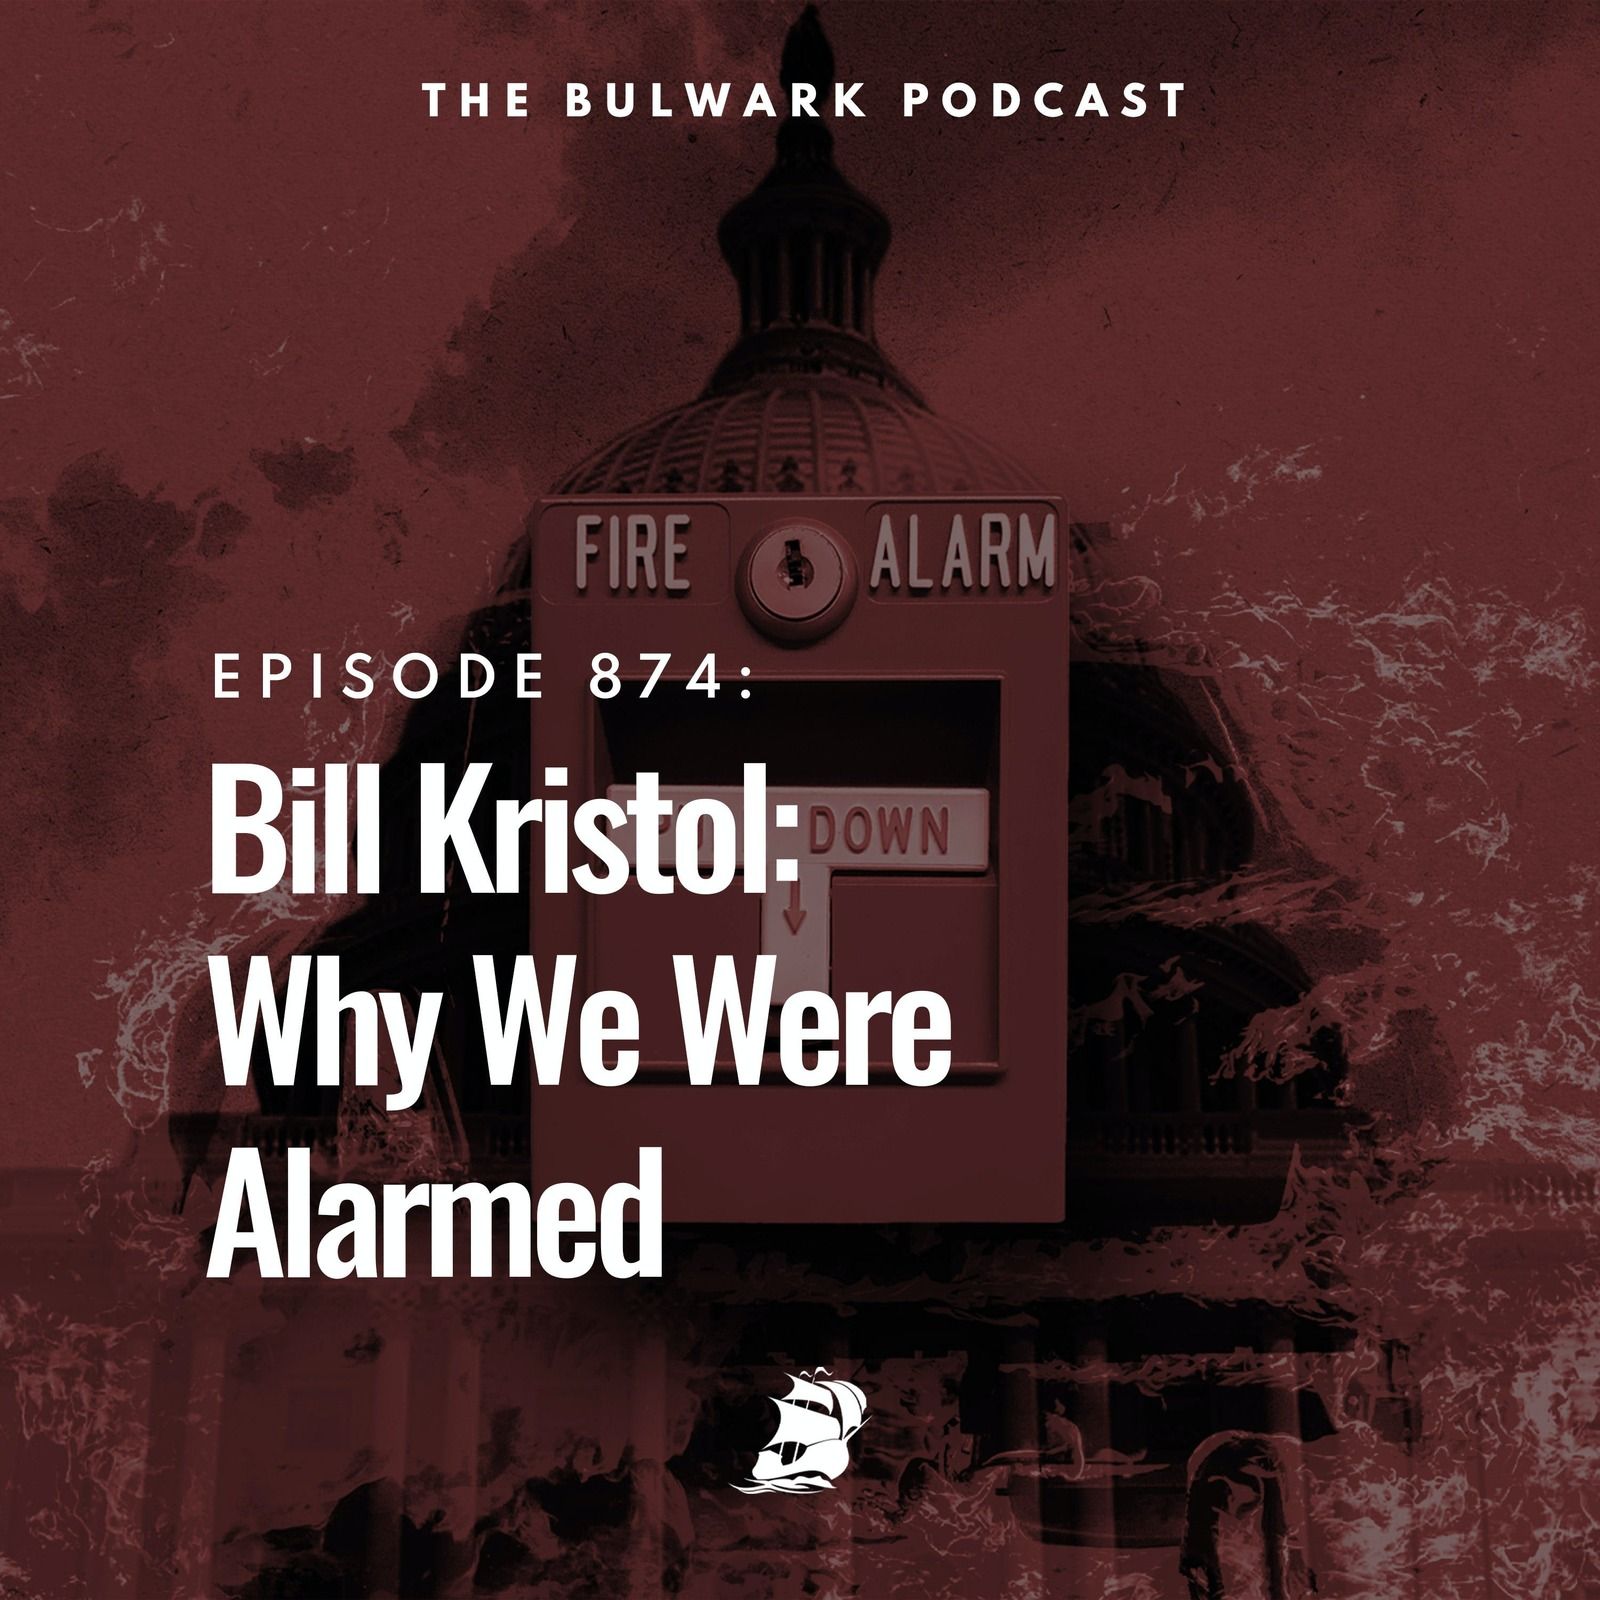 Bill Kristol: Why We Were Alarmed by The Bulwark Podcast